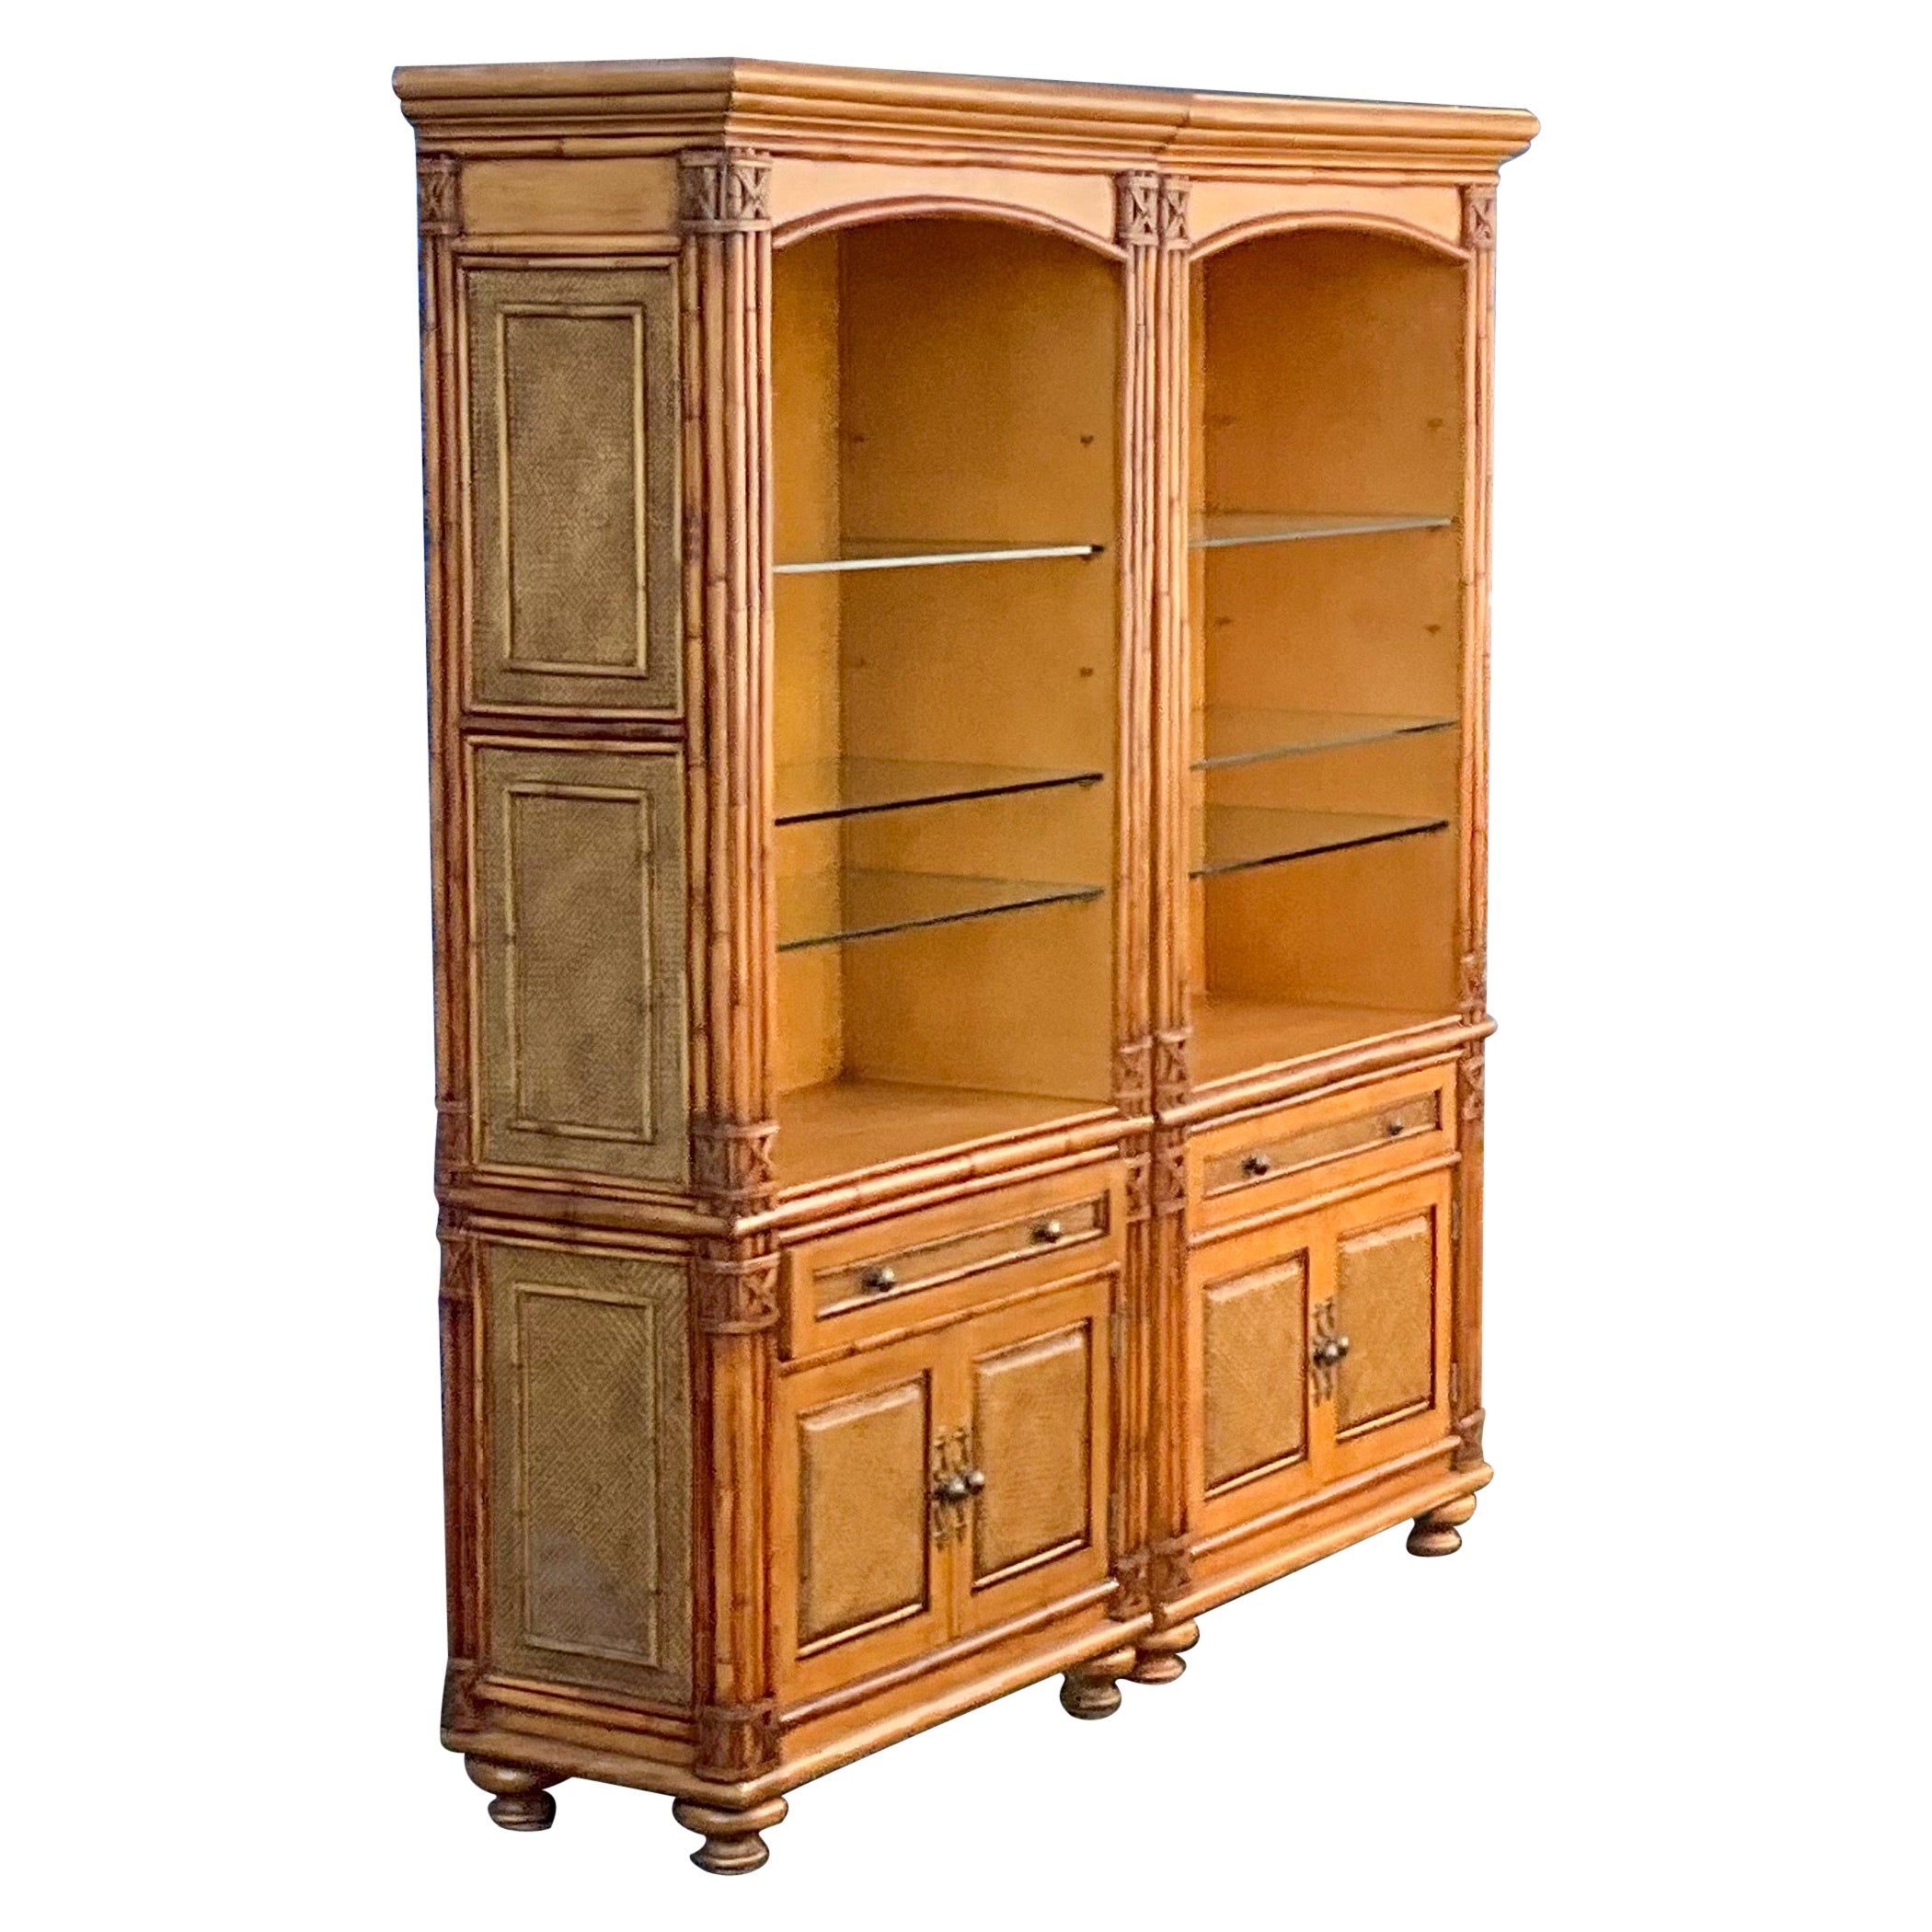 Regency Coastal Style Faux Bamboo Fruitwood Bookcases / Display Cabinets - S/2